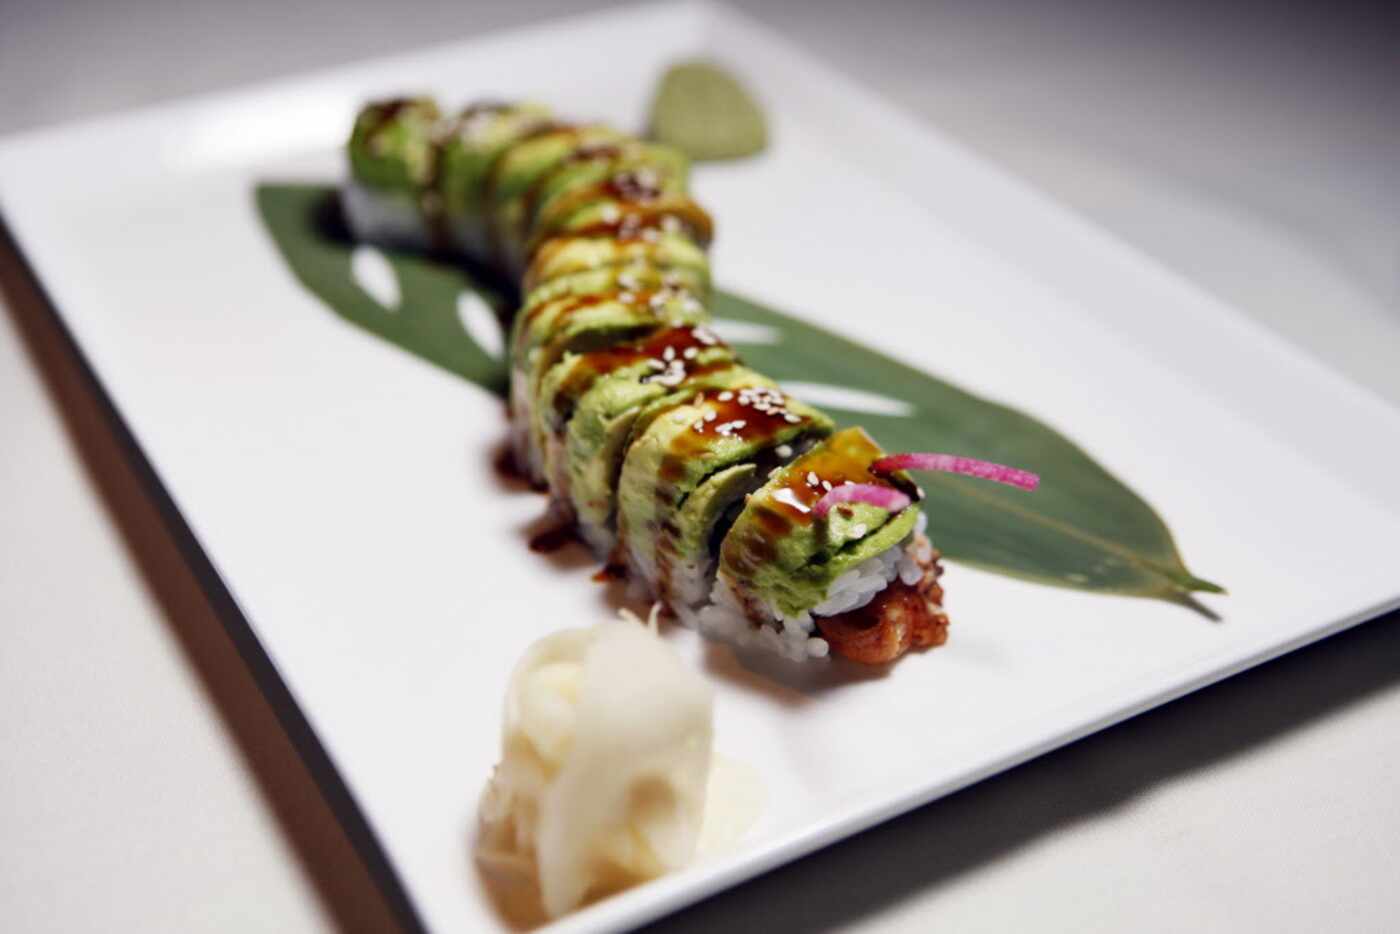 Caterpillar roll with fresh water eel, cucumber and avocado